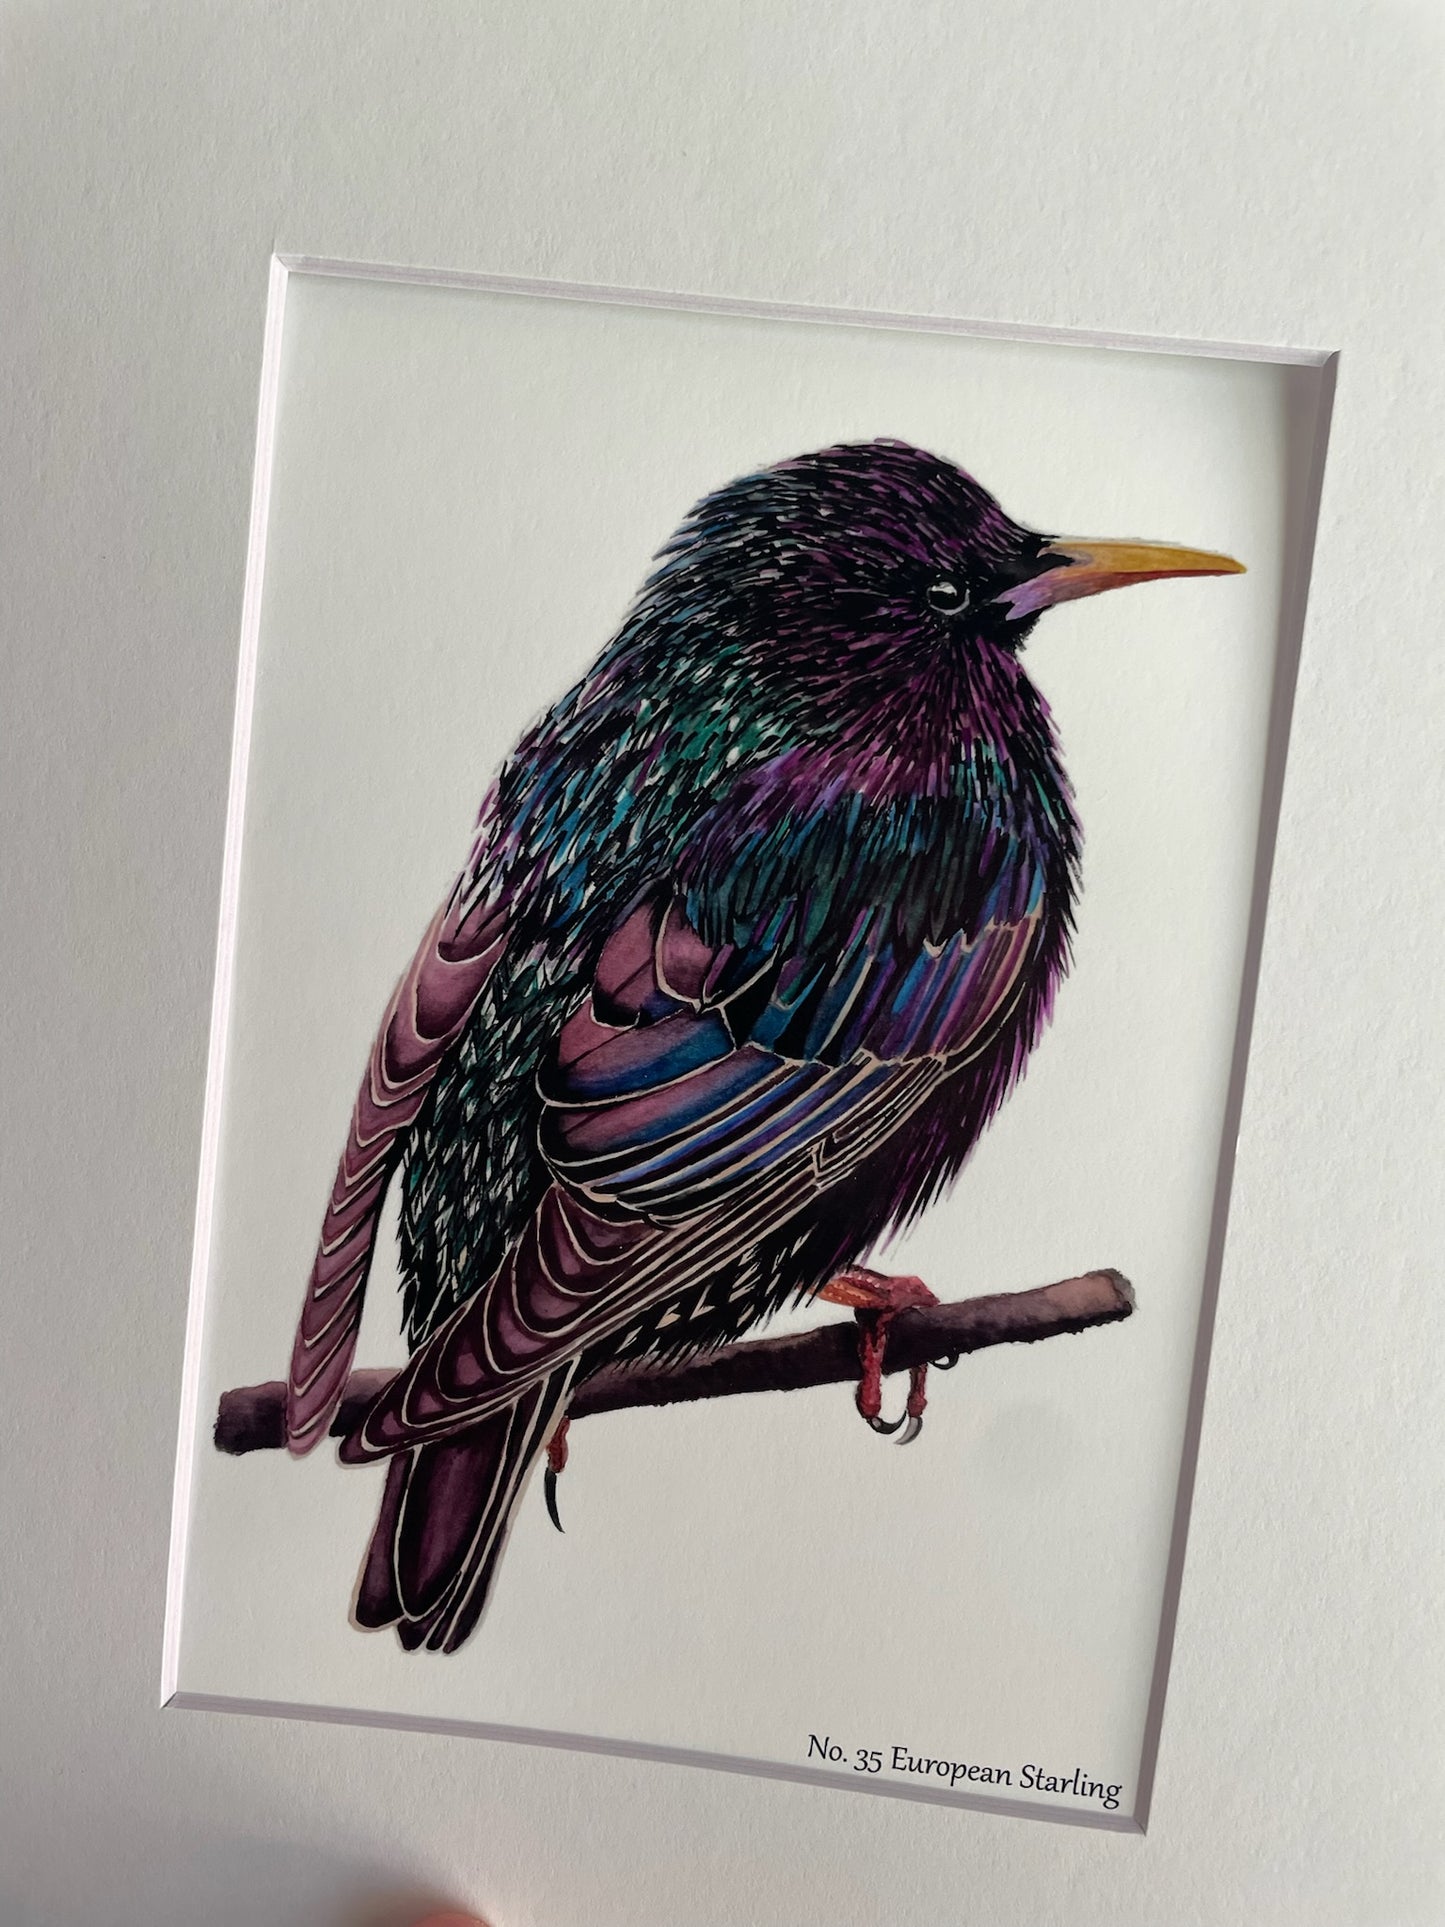 European Starling - Bird Art by KB - Giclee Print with White Mat